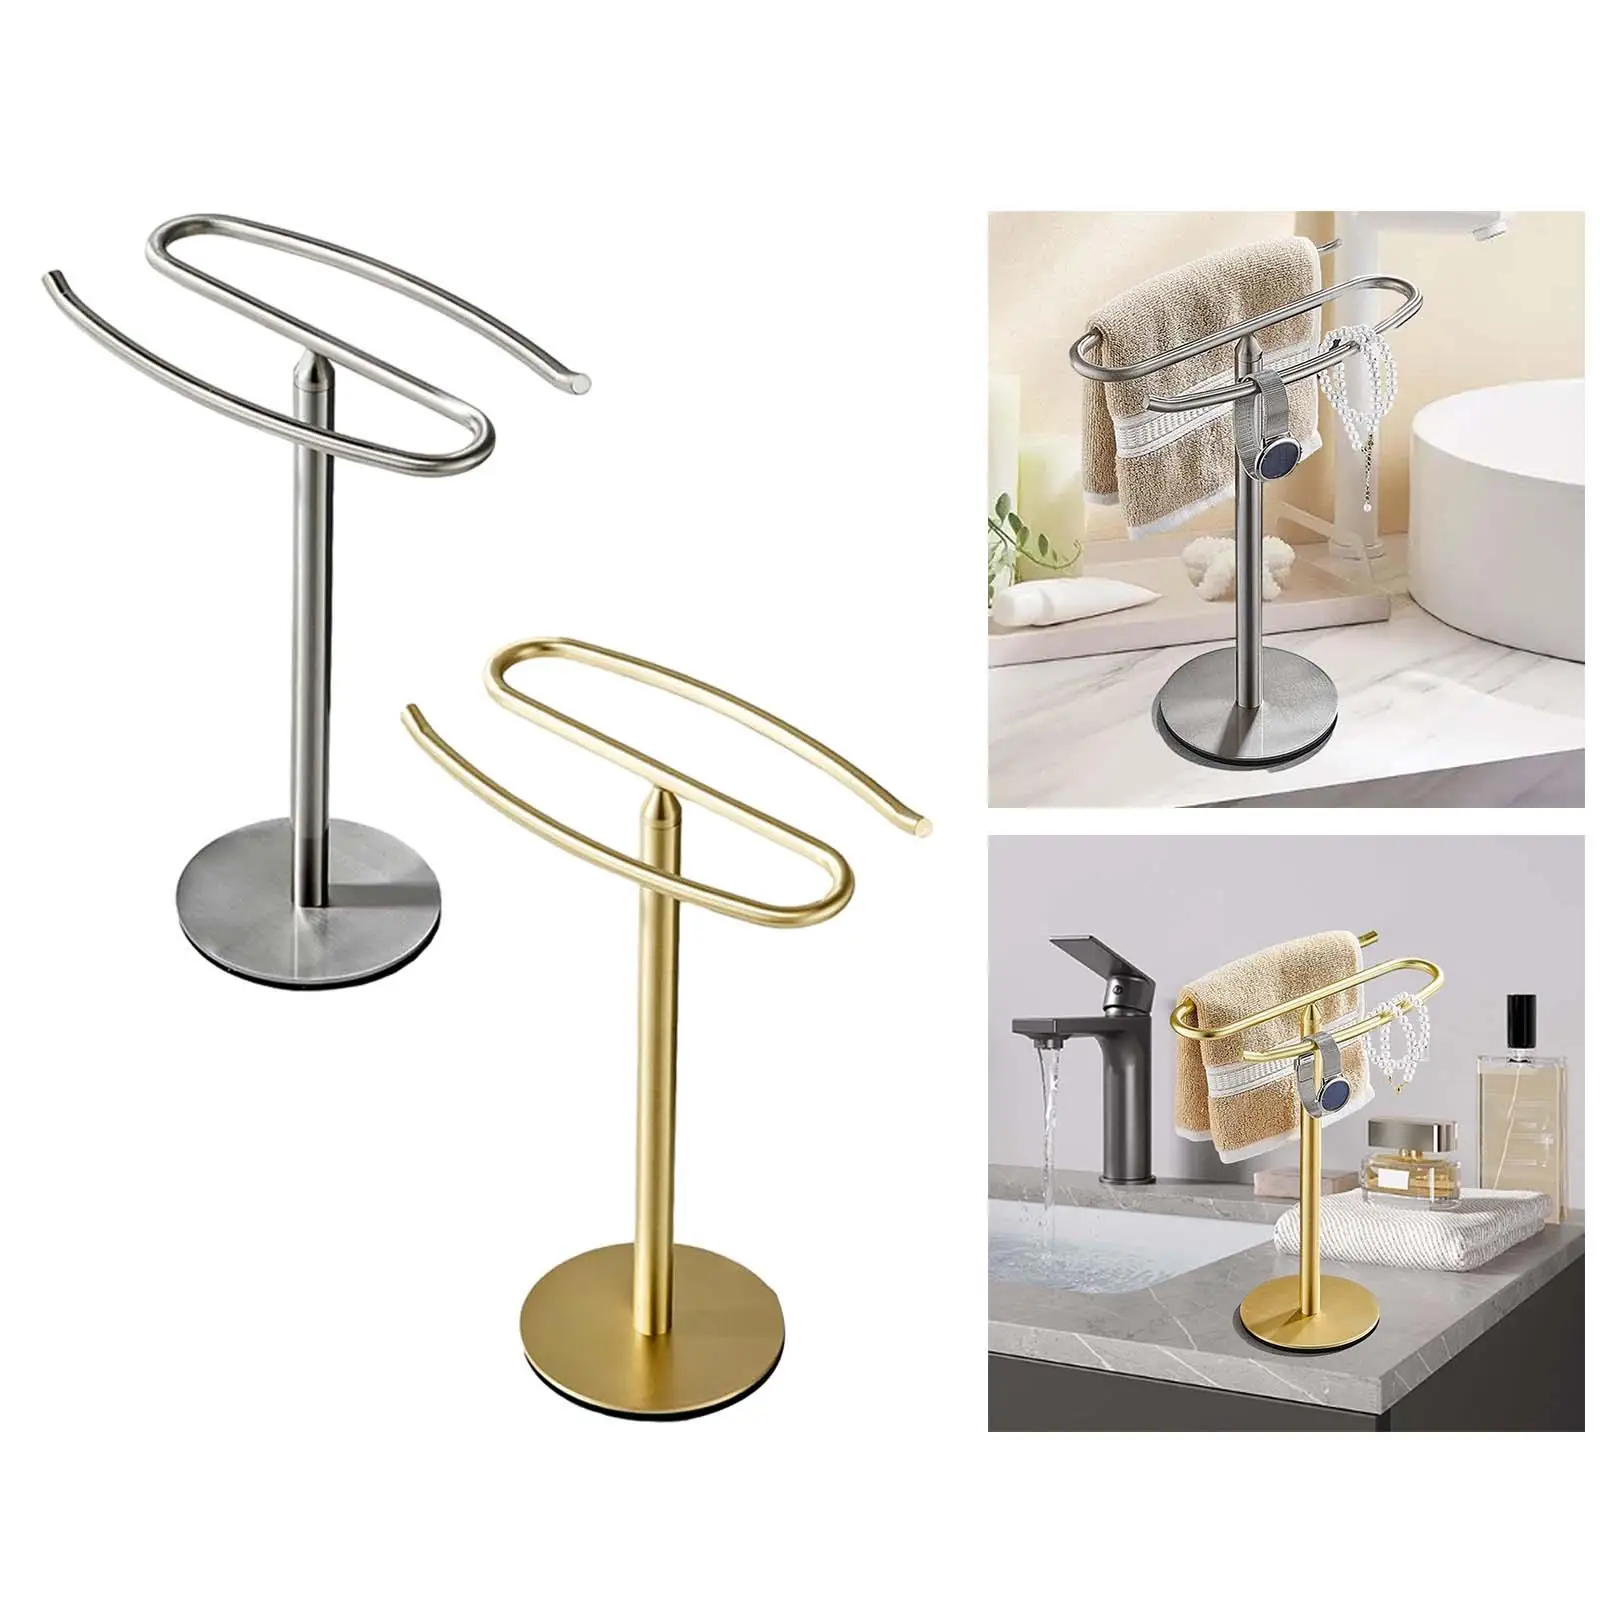 Towel Bar Rack Necklace Holder Stainless Steel Heavy Weighted Base Rust Resistant Versatile for Vanity Countertop Accessories